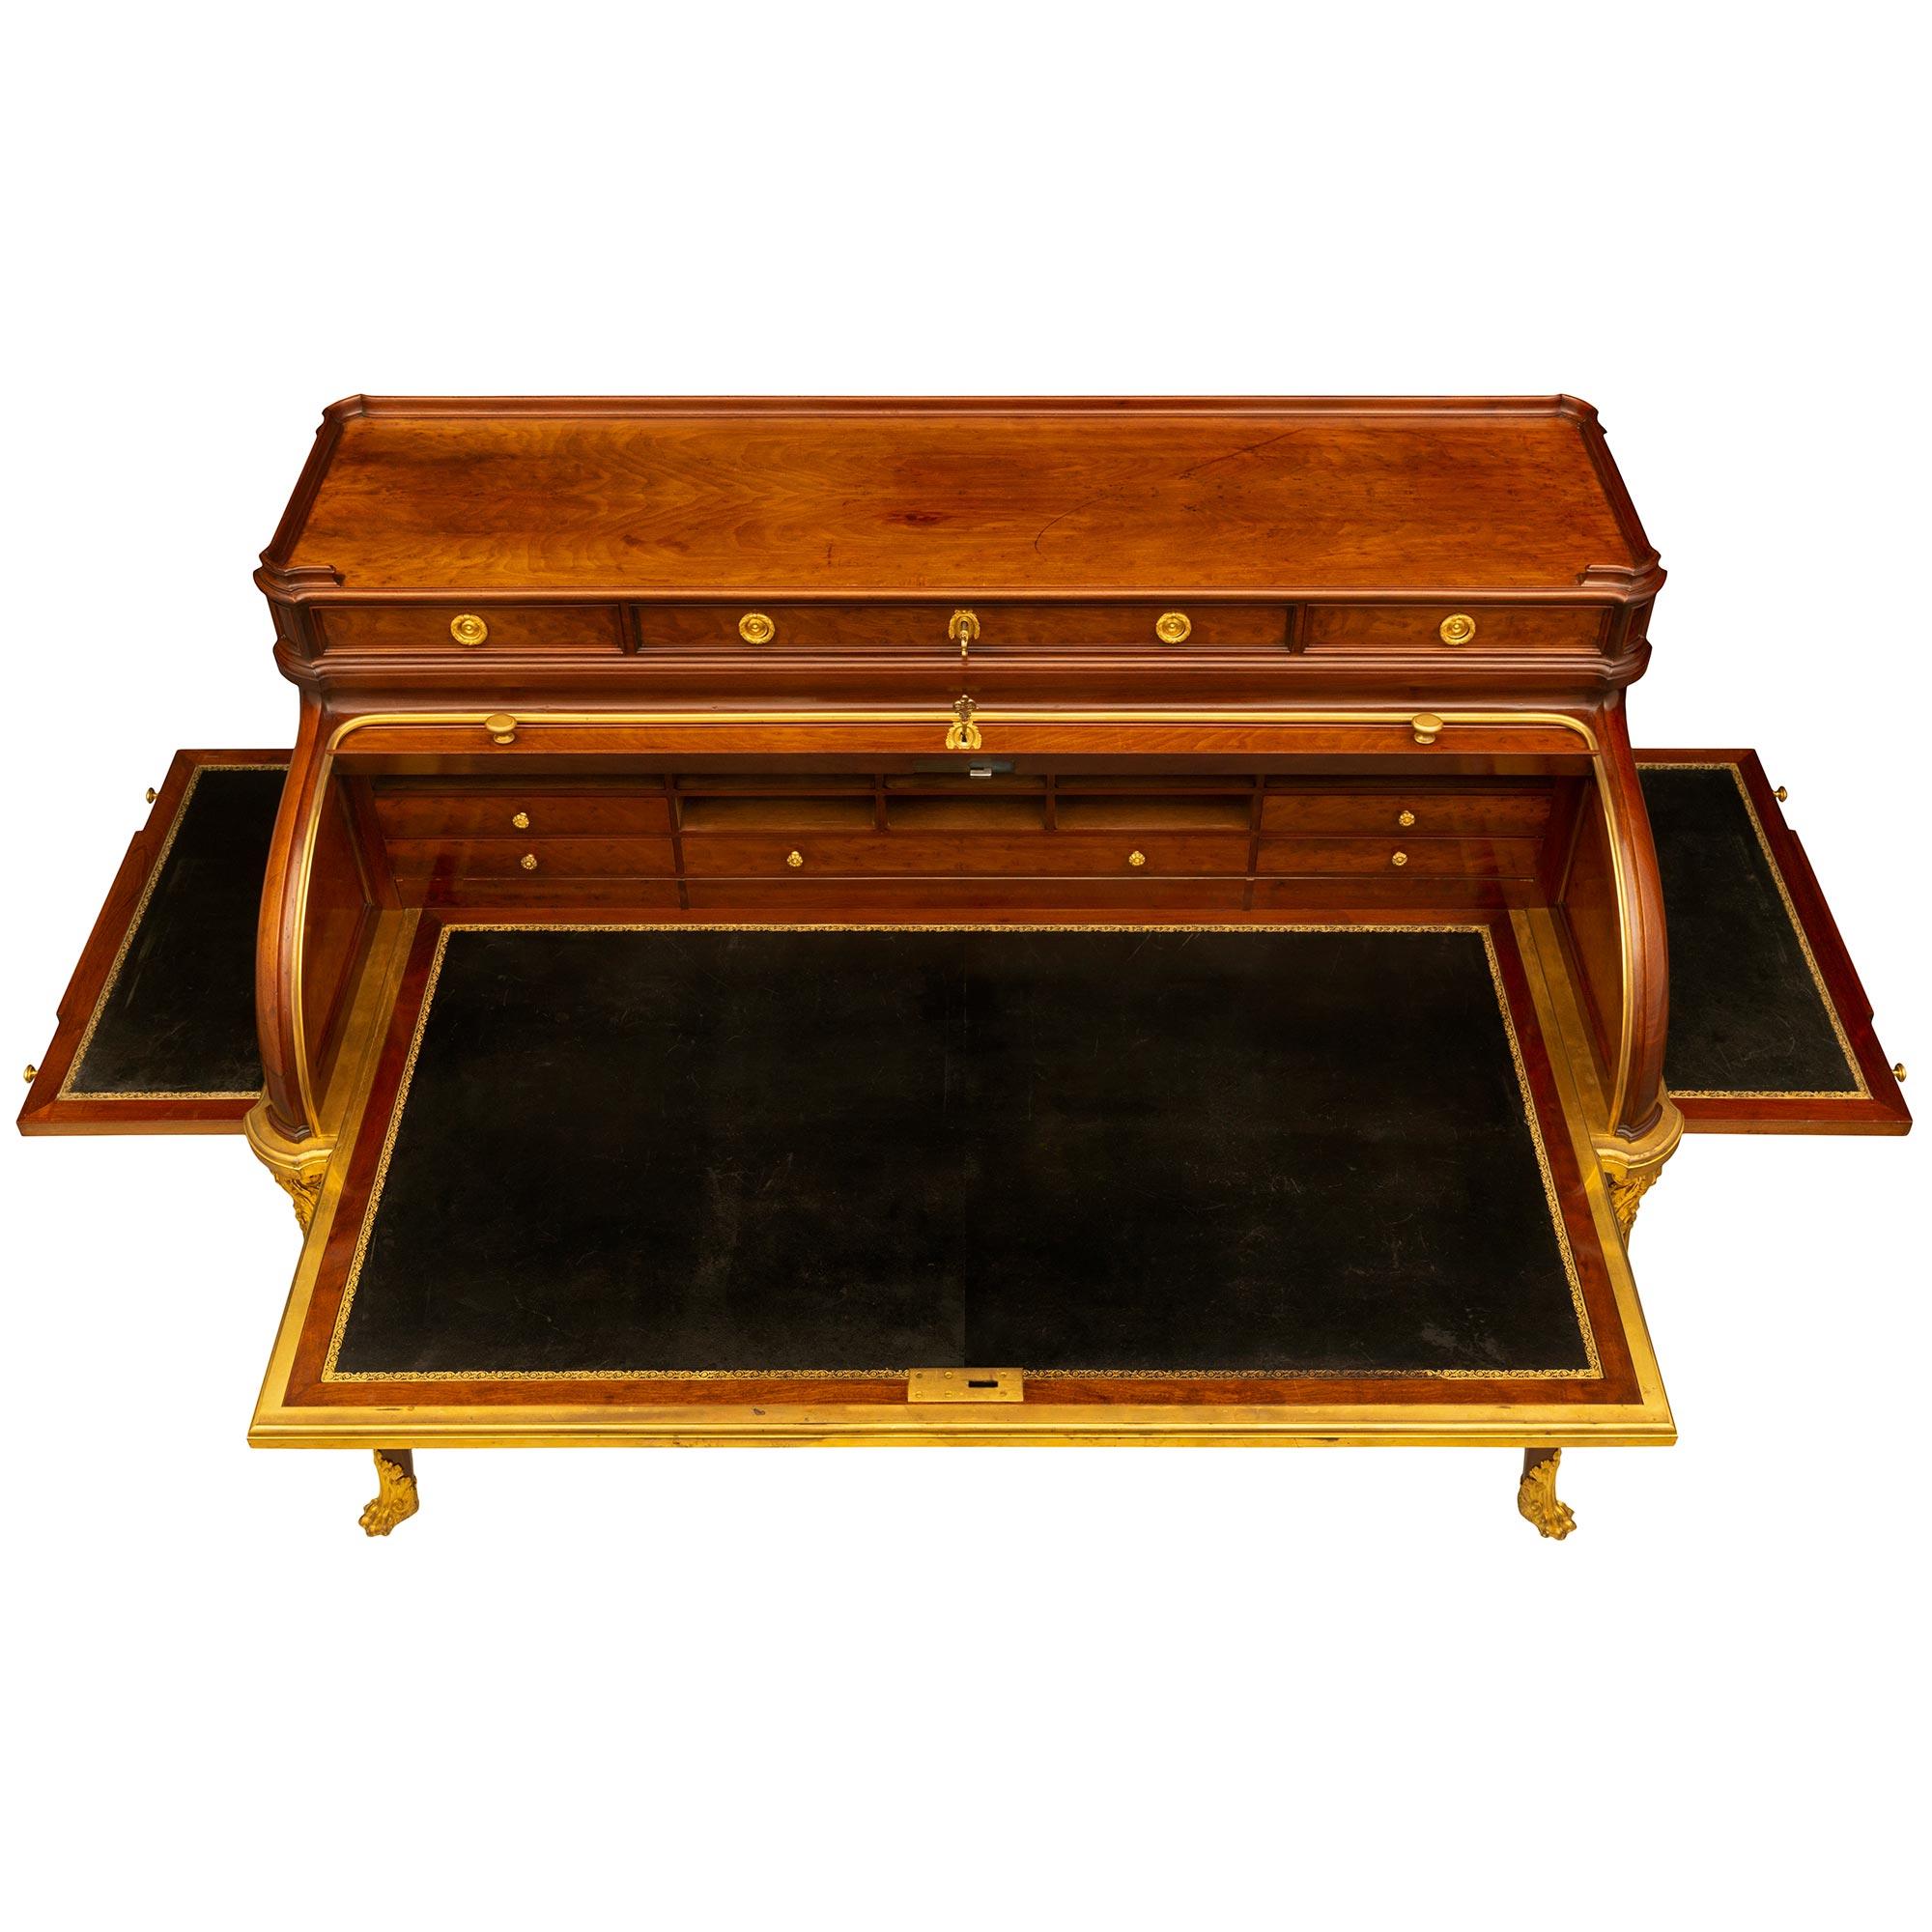 An impressive and palatially scaled French 19th century Transitional st. Moucheté Mahogany and ormolu Bureau à Cylindre desk. The exceptional thirteen drawer roll top desk is raised by elegant cabriole legs with fitted ormolu sabots with handsome